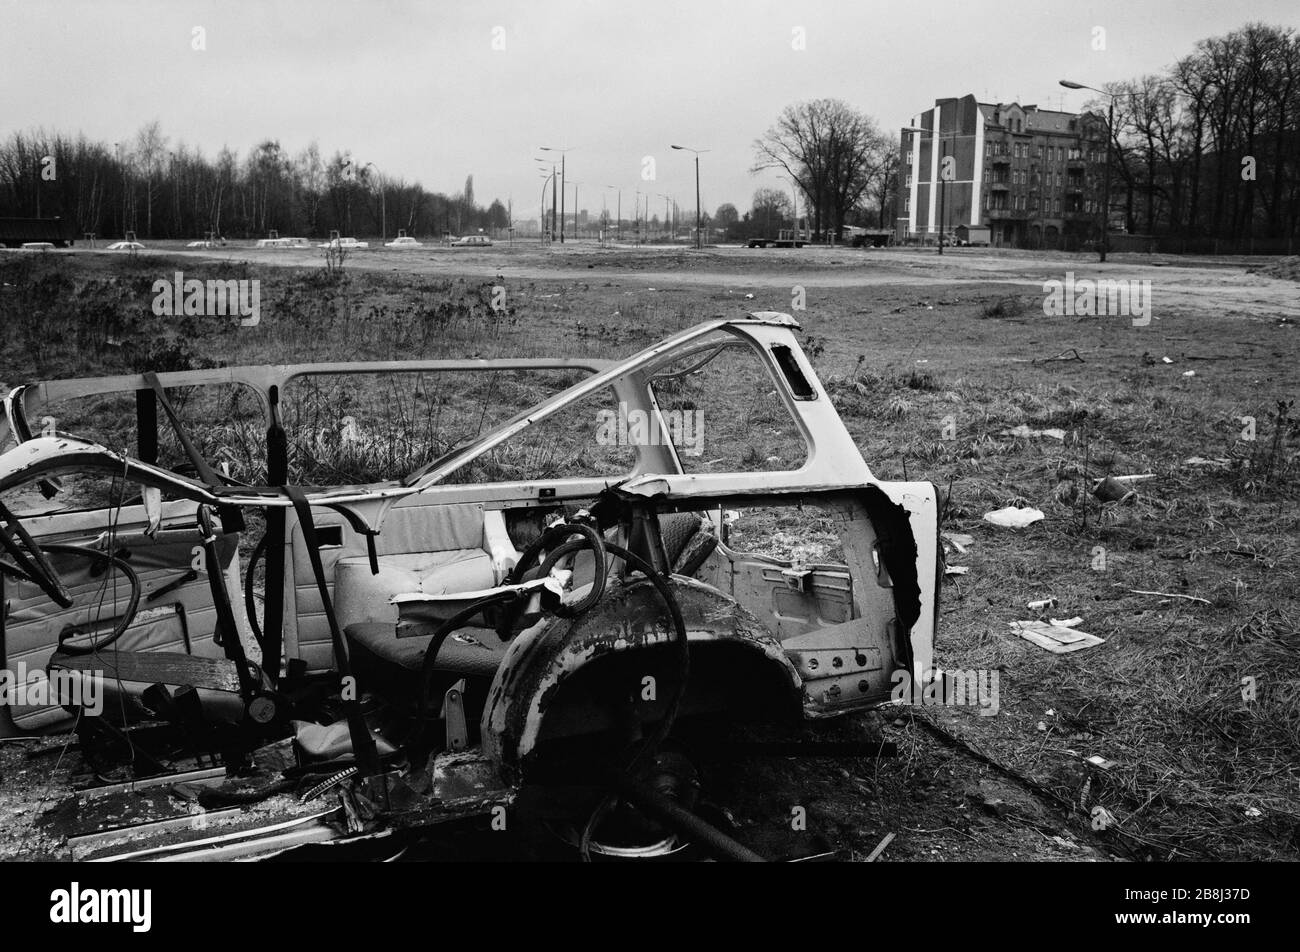 A wrecked shell of an East German Trabant motor car near a section of the course of the former Berlin Wall, Bornholmer Strasse, Berlin. The Berlin Wall was a barrier constructed by the German Democratic Republic (GDR, East Germany) starting on 13 August 1961, that completely cut off West Berlin from surrounding East Germany and from East Berlin. The Wall was opened on 9. November 1989 allowing free movement of people from east to west. Stock Photo